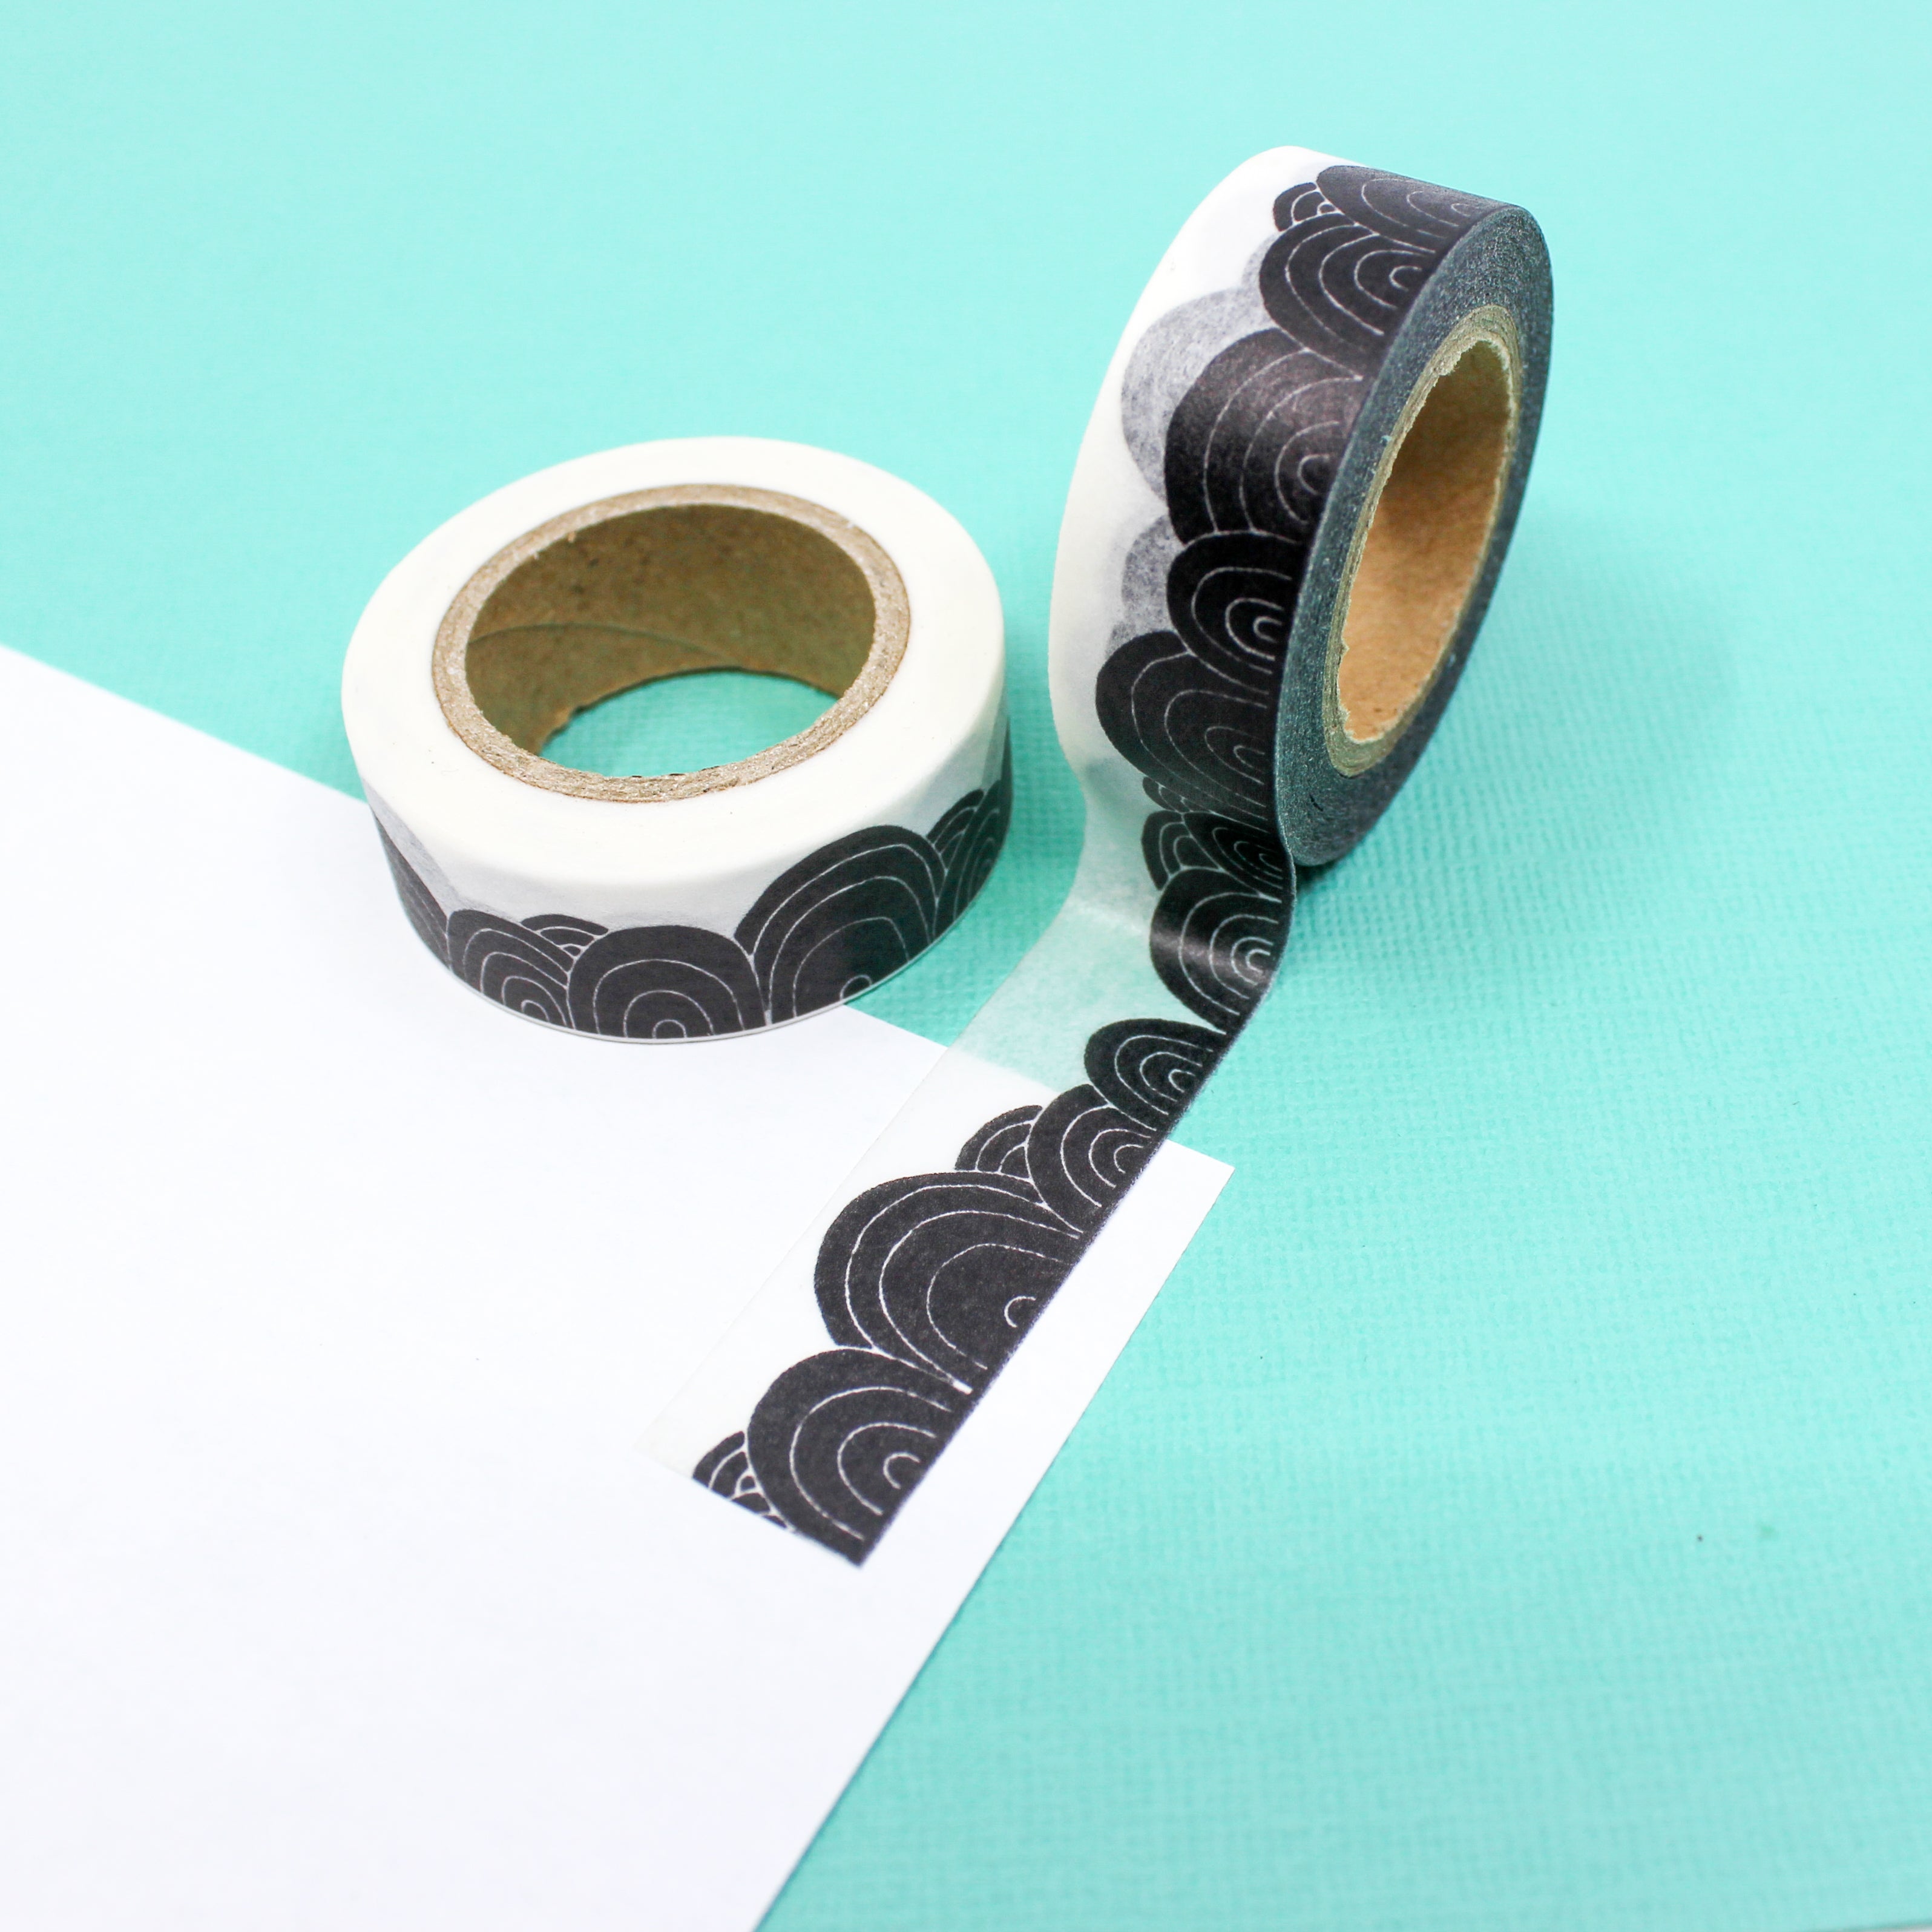 This is a black puffy dream clouds pattern Washi Tape from BBB Supplies Craft Shop